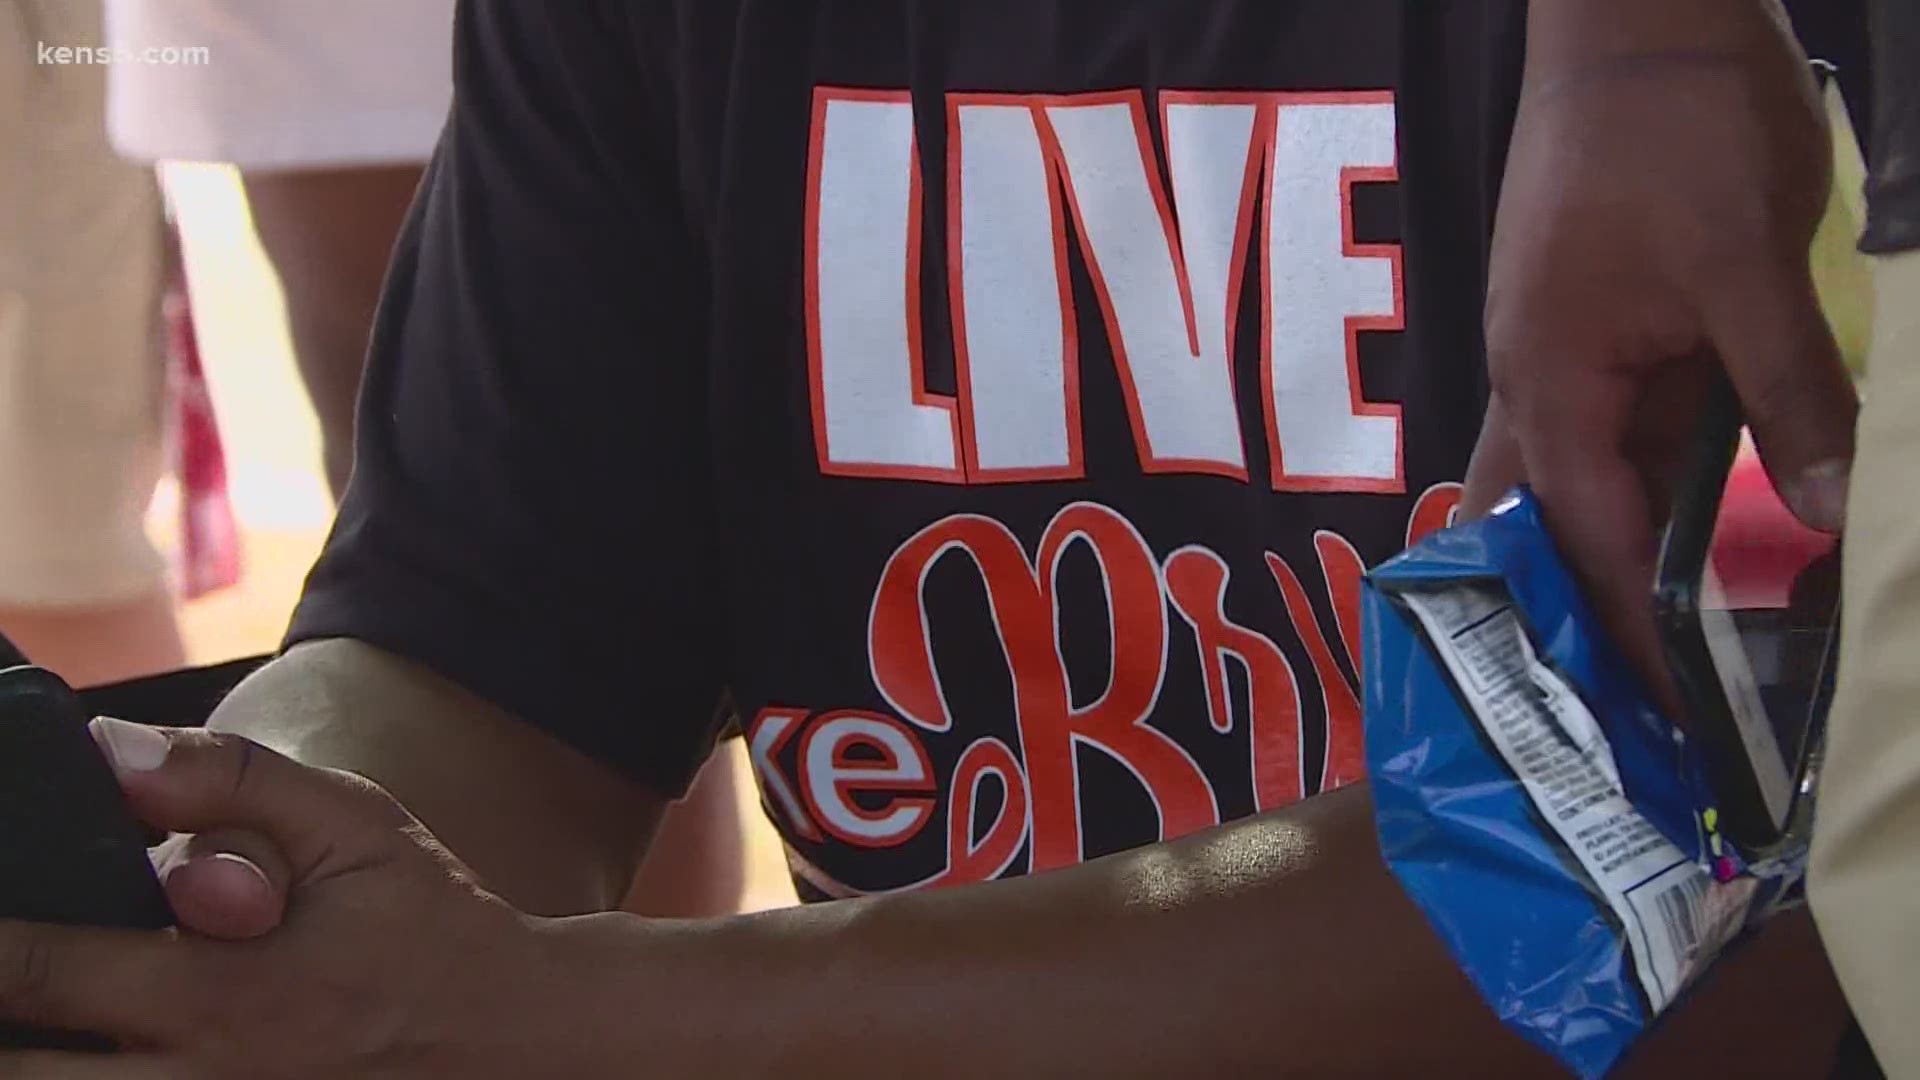 The San Antonio teen's spirits were high as his family sold T-shirts to pay for the rising costs of cancer treatment.